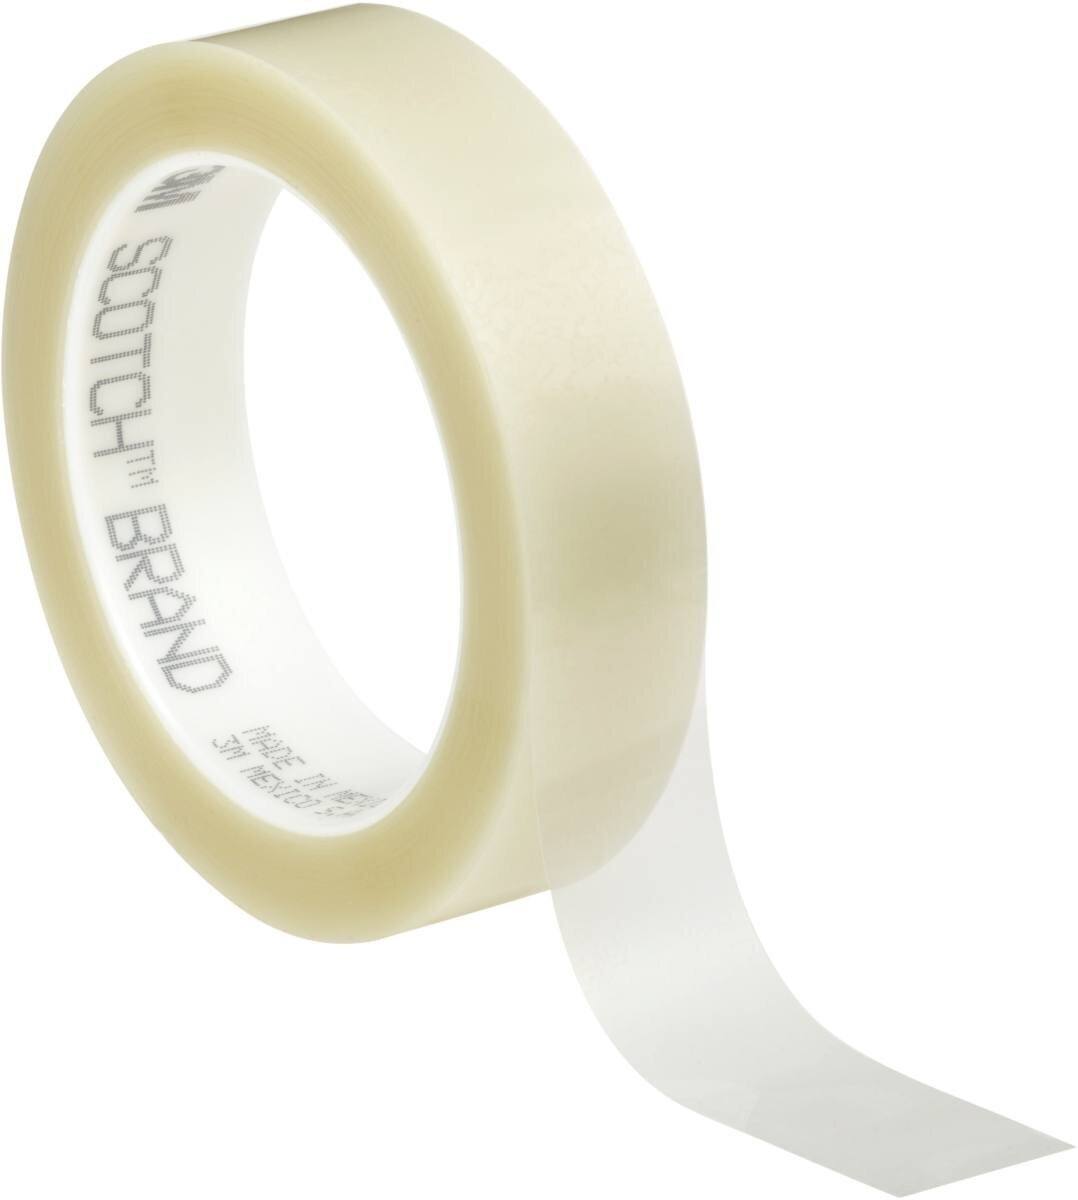 3M polyester adhesive tape 853, transparent, 19 mm x 66 m, 0.06 mm